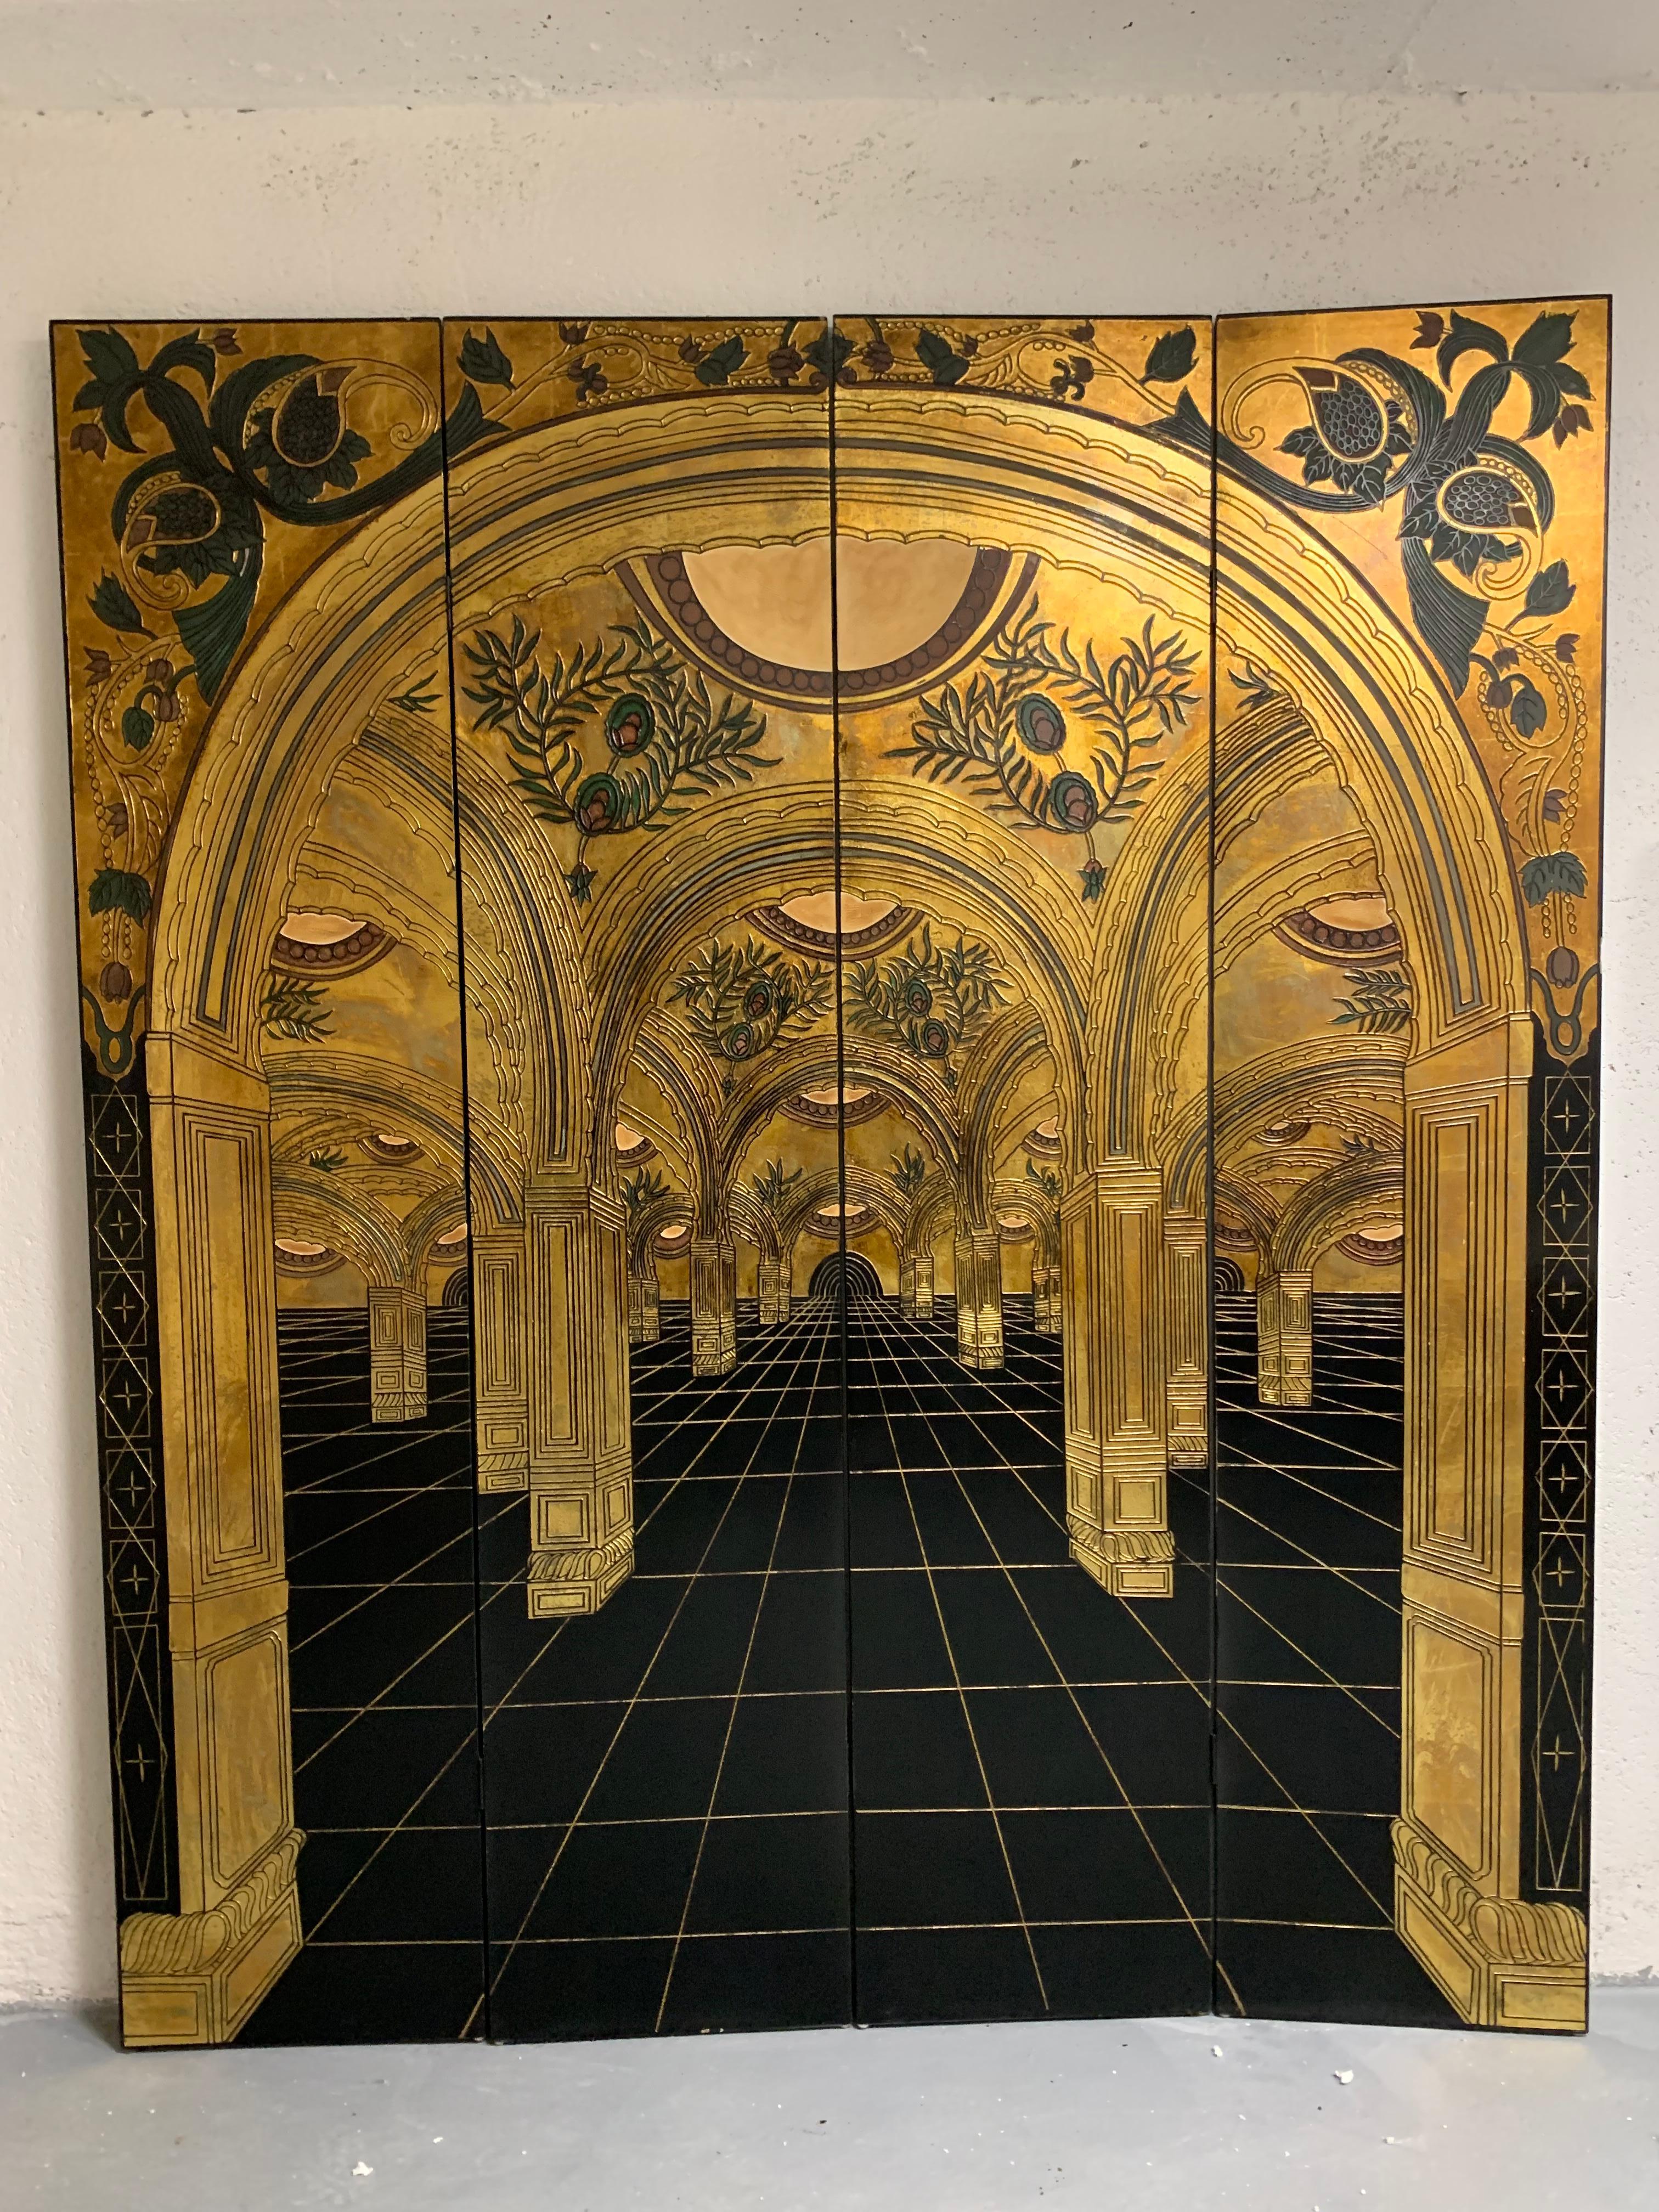 Beautiful and rare Art Nouveau or Art Deco 20th century Paravent. The stunning geometry of the pattern draws you into a hall full of archways and pillars.
The room divider has four panels and is made out of wood, painted and gold leafed. The